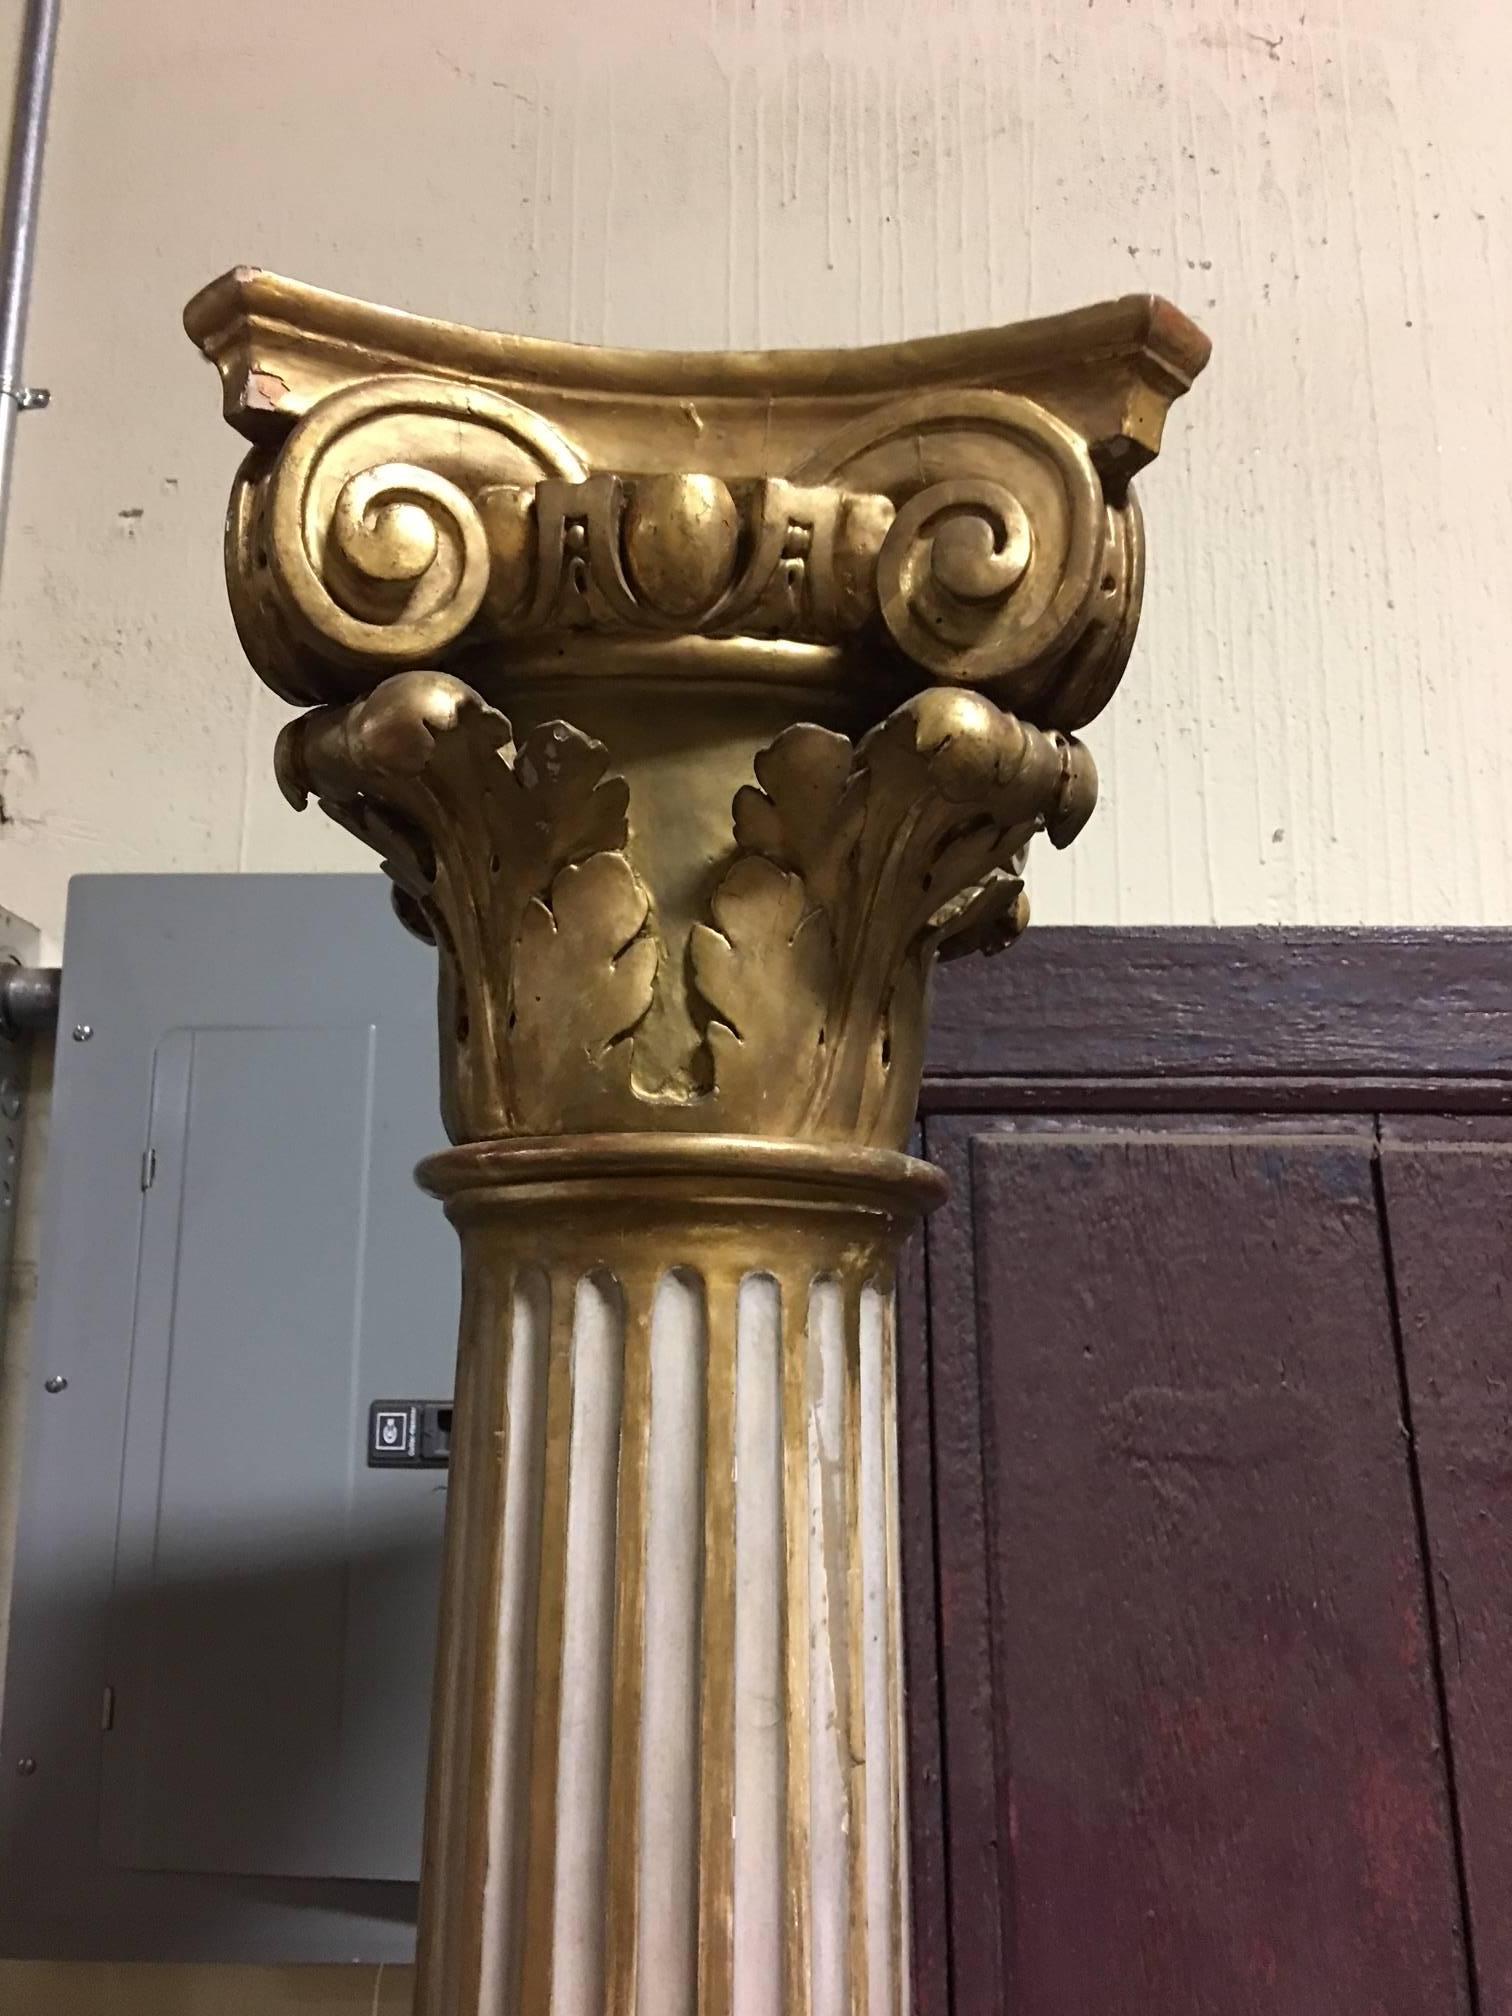 Pair of 18th century French Corinthian columns, pillars,pilasters (Base on the one not original we now have made a base for the second). Measures: 81''H.
Closing our business everything marked down 